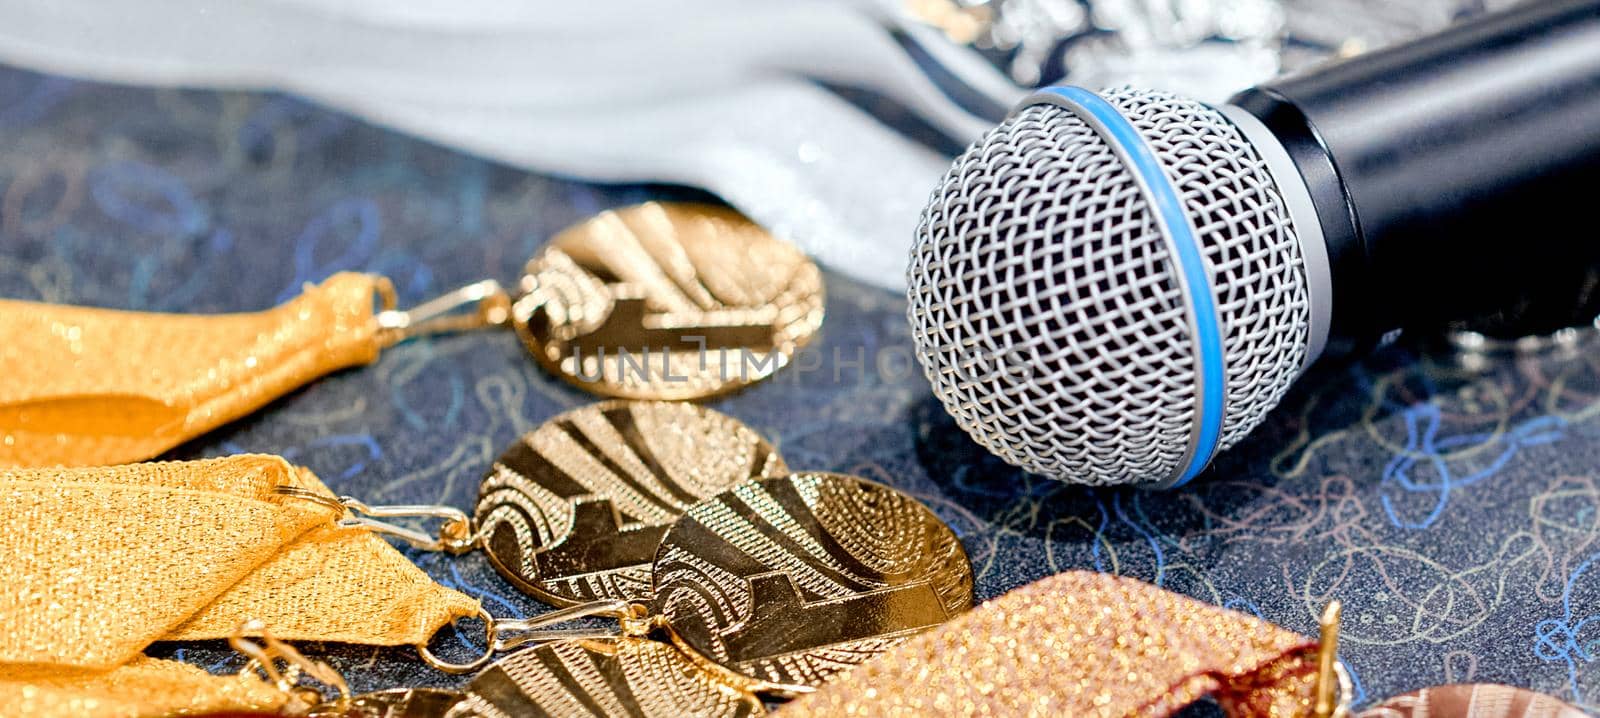 Awards, medals with ribbons on the table with a microphone . High quality photo